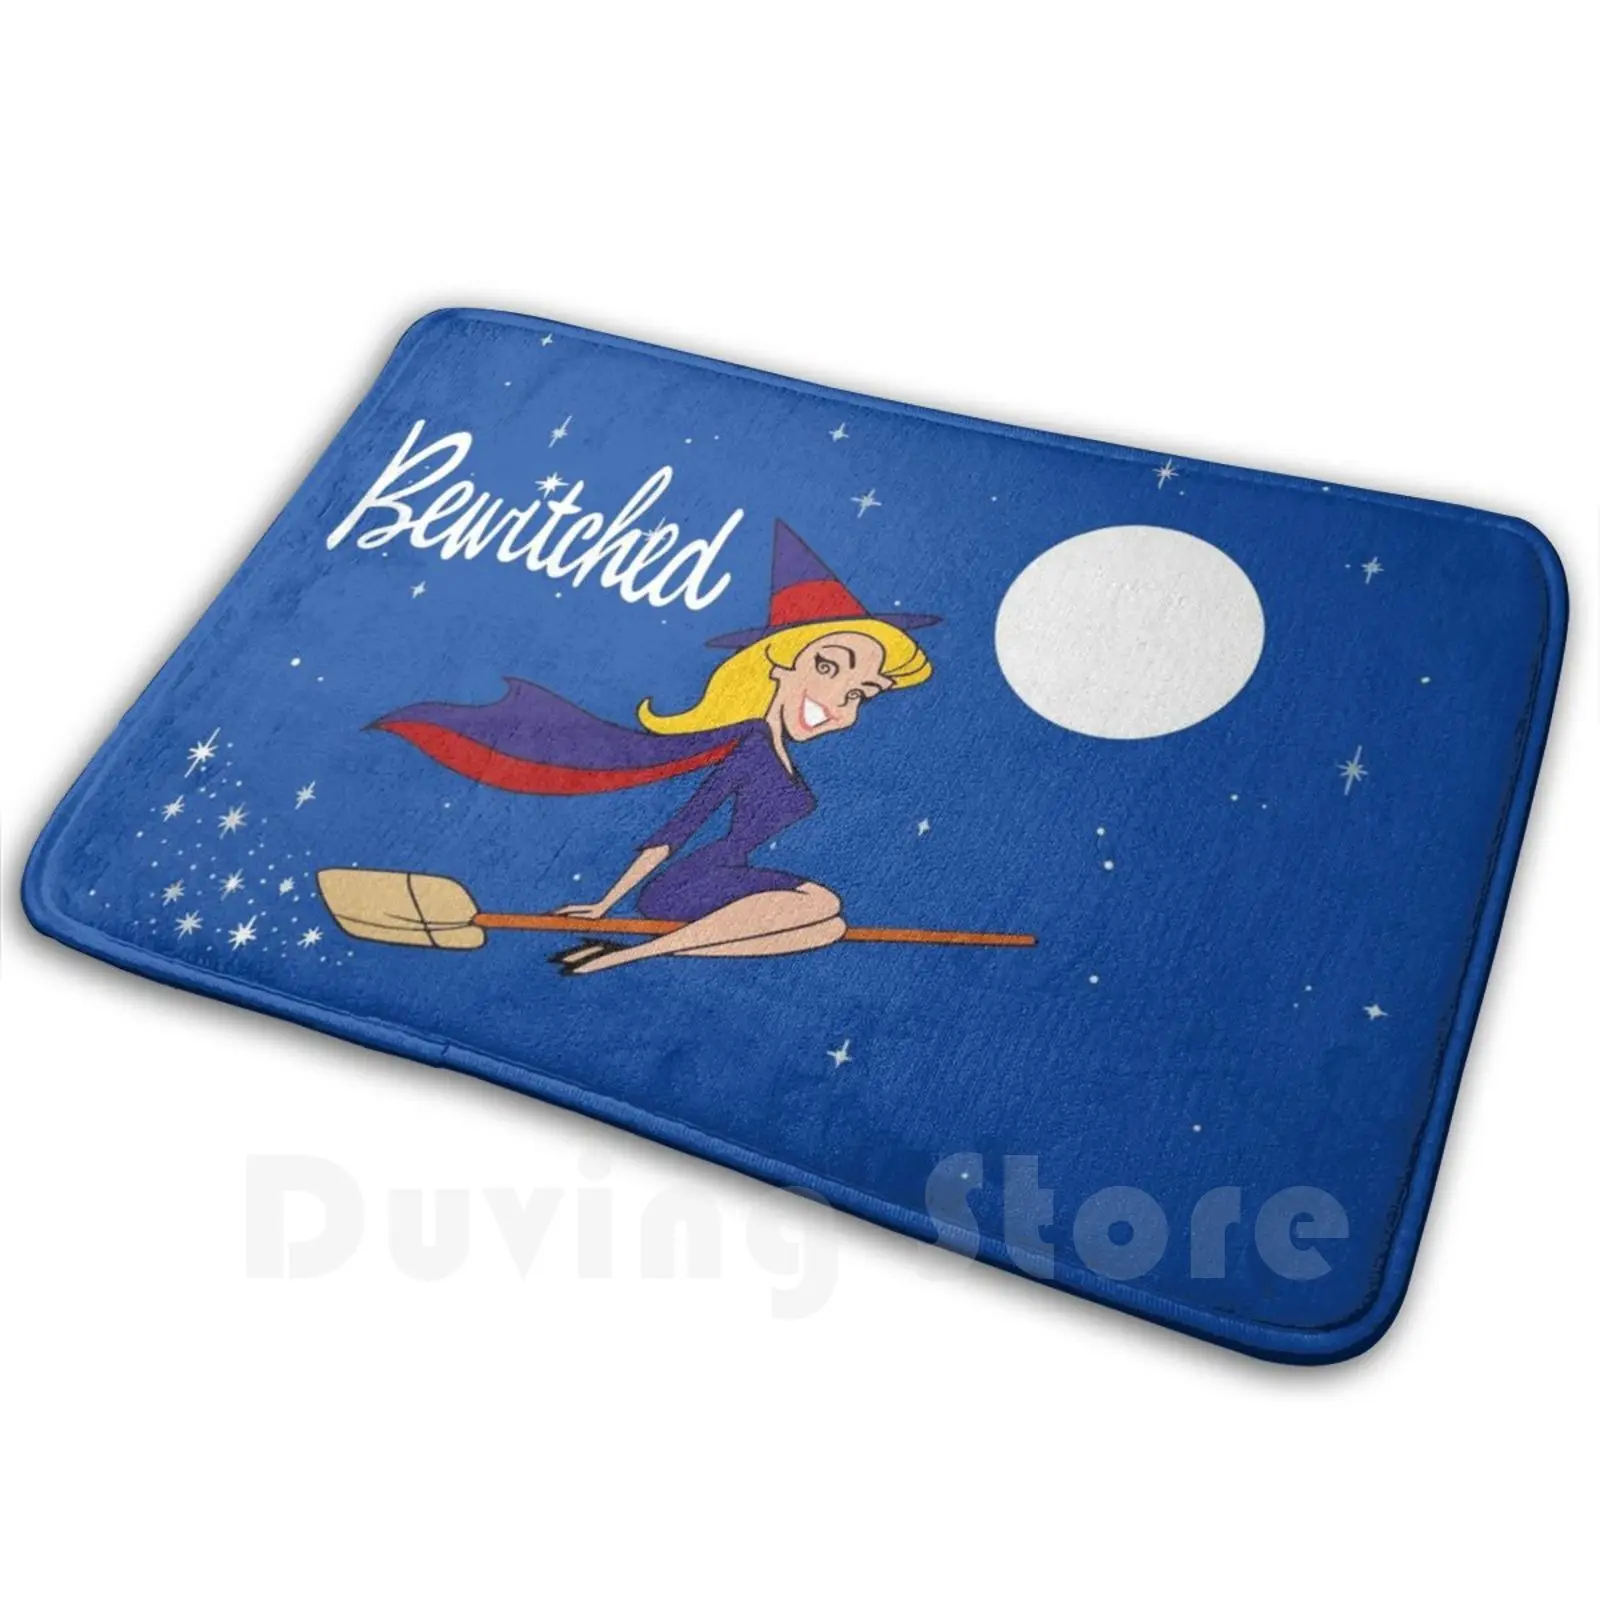 Bewitched 60S Retro Mat Rug Carpet Anti-Slip Floor Mats Bedroom Cartoon Bewitched Endora Darrin Montgomery Witch Witches Screen